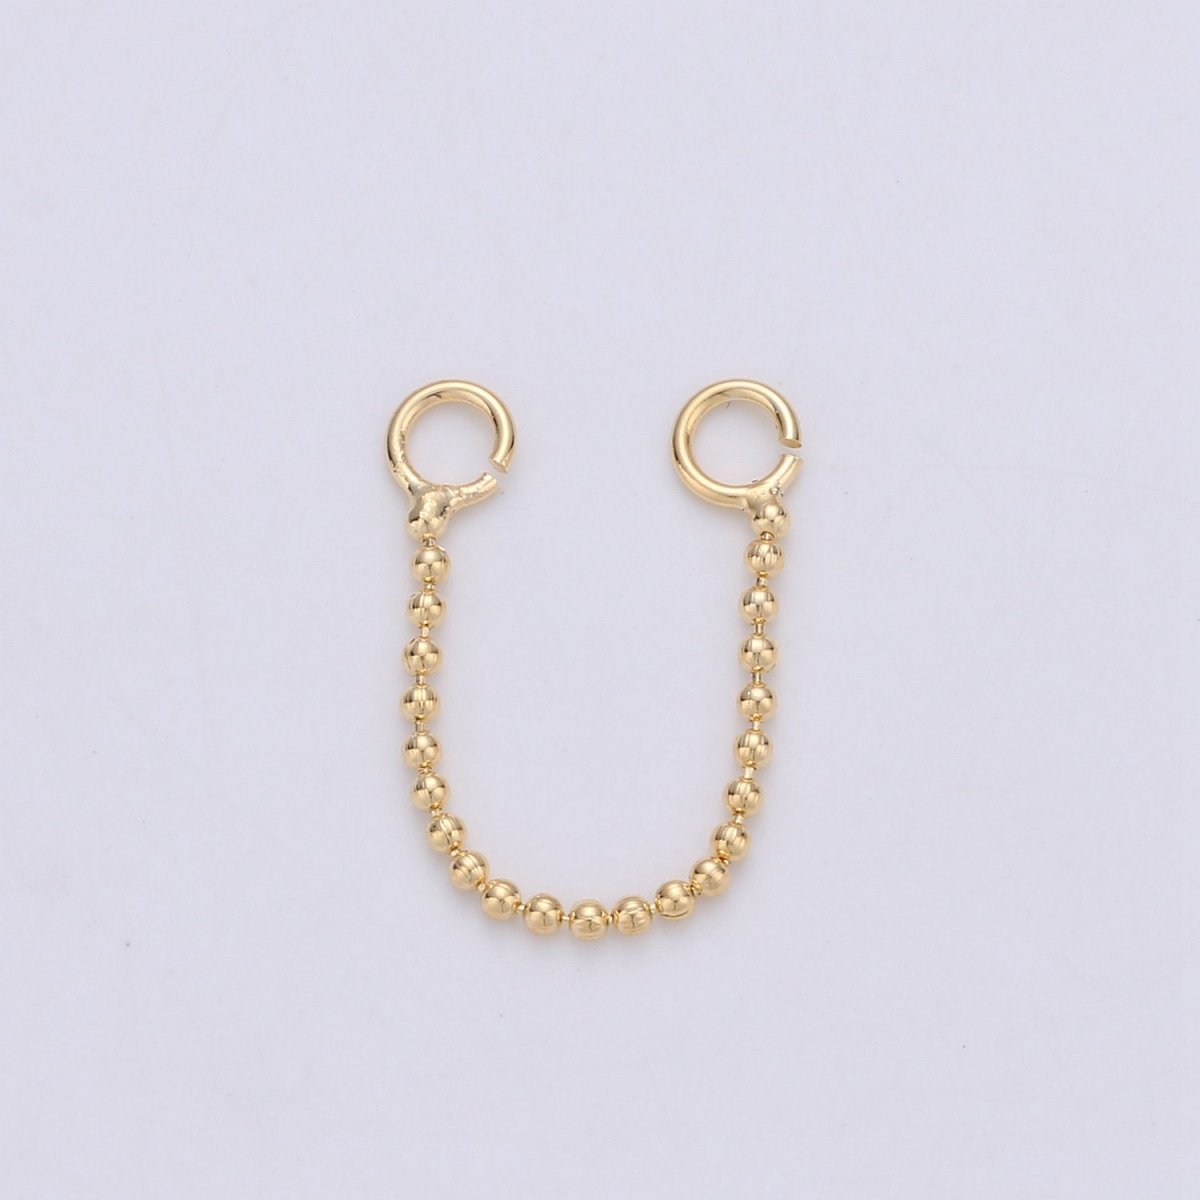 Real Gold Plated Earring Single Link Chain Connector for Earring Finding Jewelry Supply Lead free Nickel Free K-418 - DLUXCA